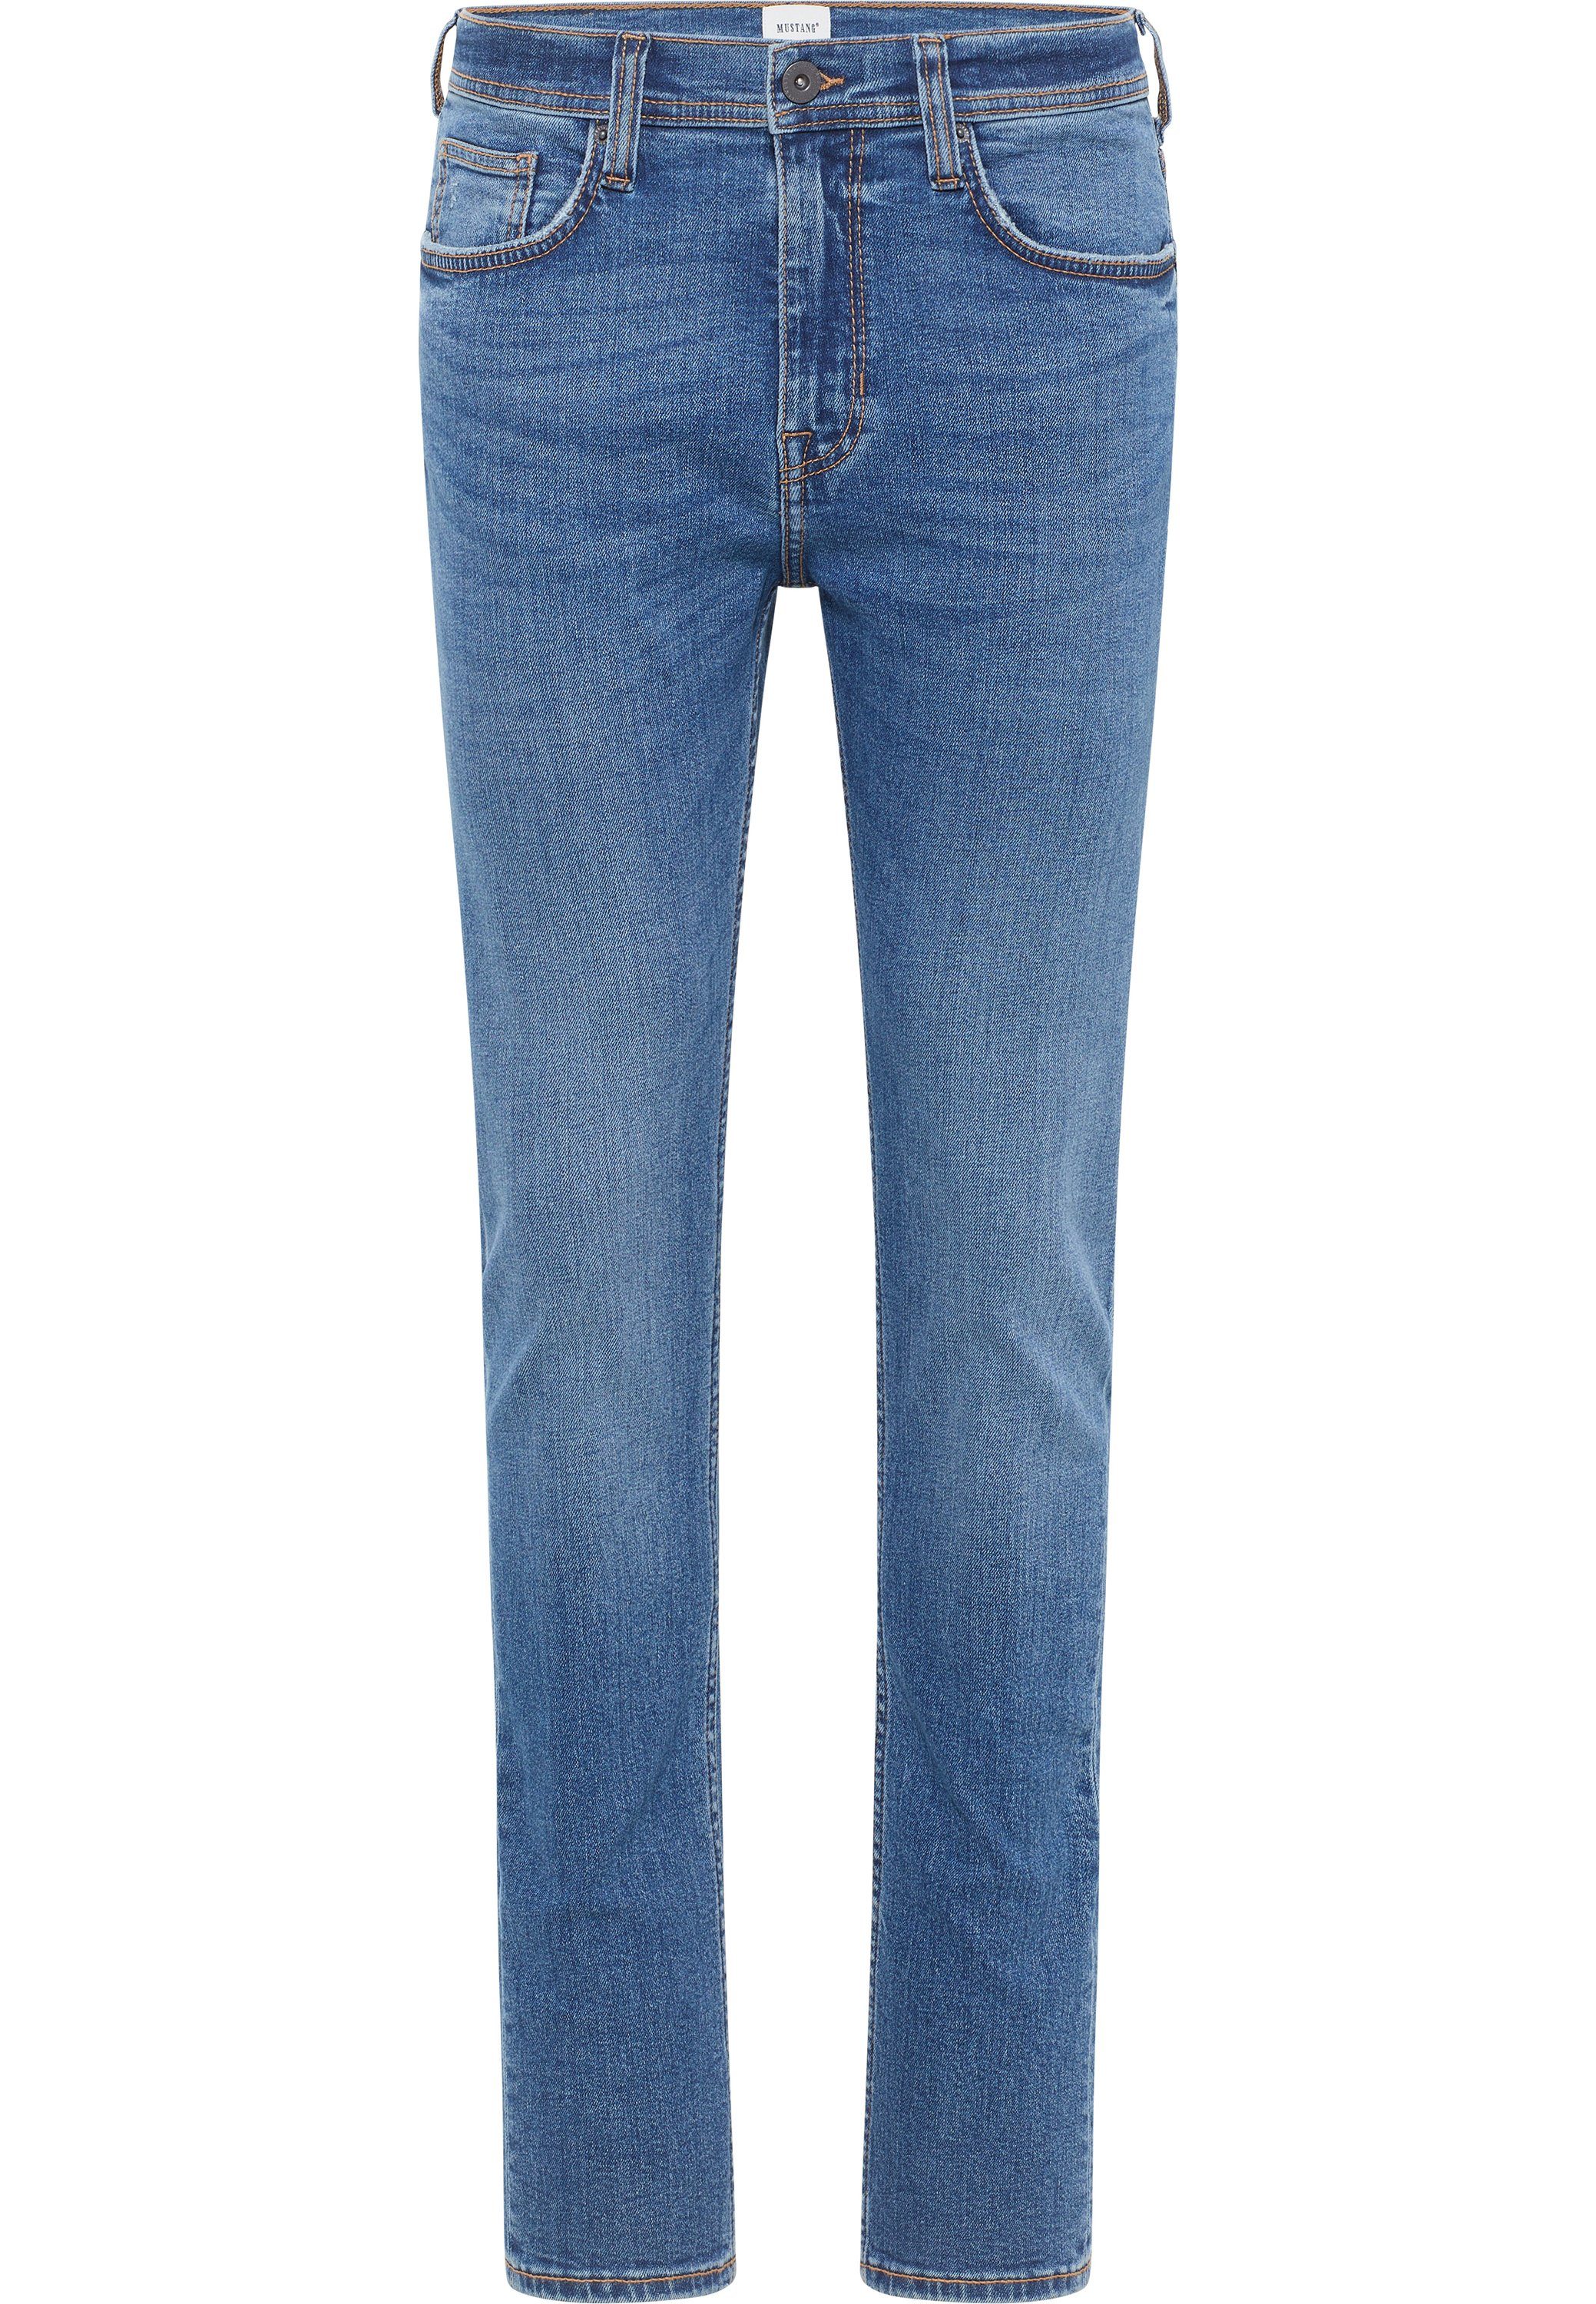 MUSTANG 5-Pocket-Jeans Mustang Hose Style Orlando Slim Mustang Style Orlando Slim mittelblau